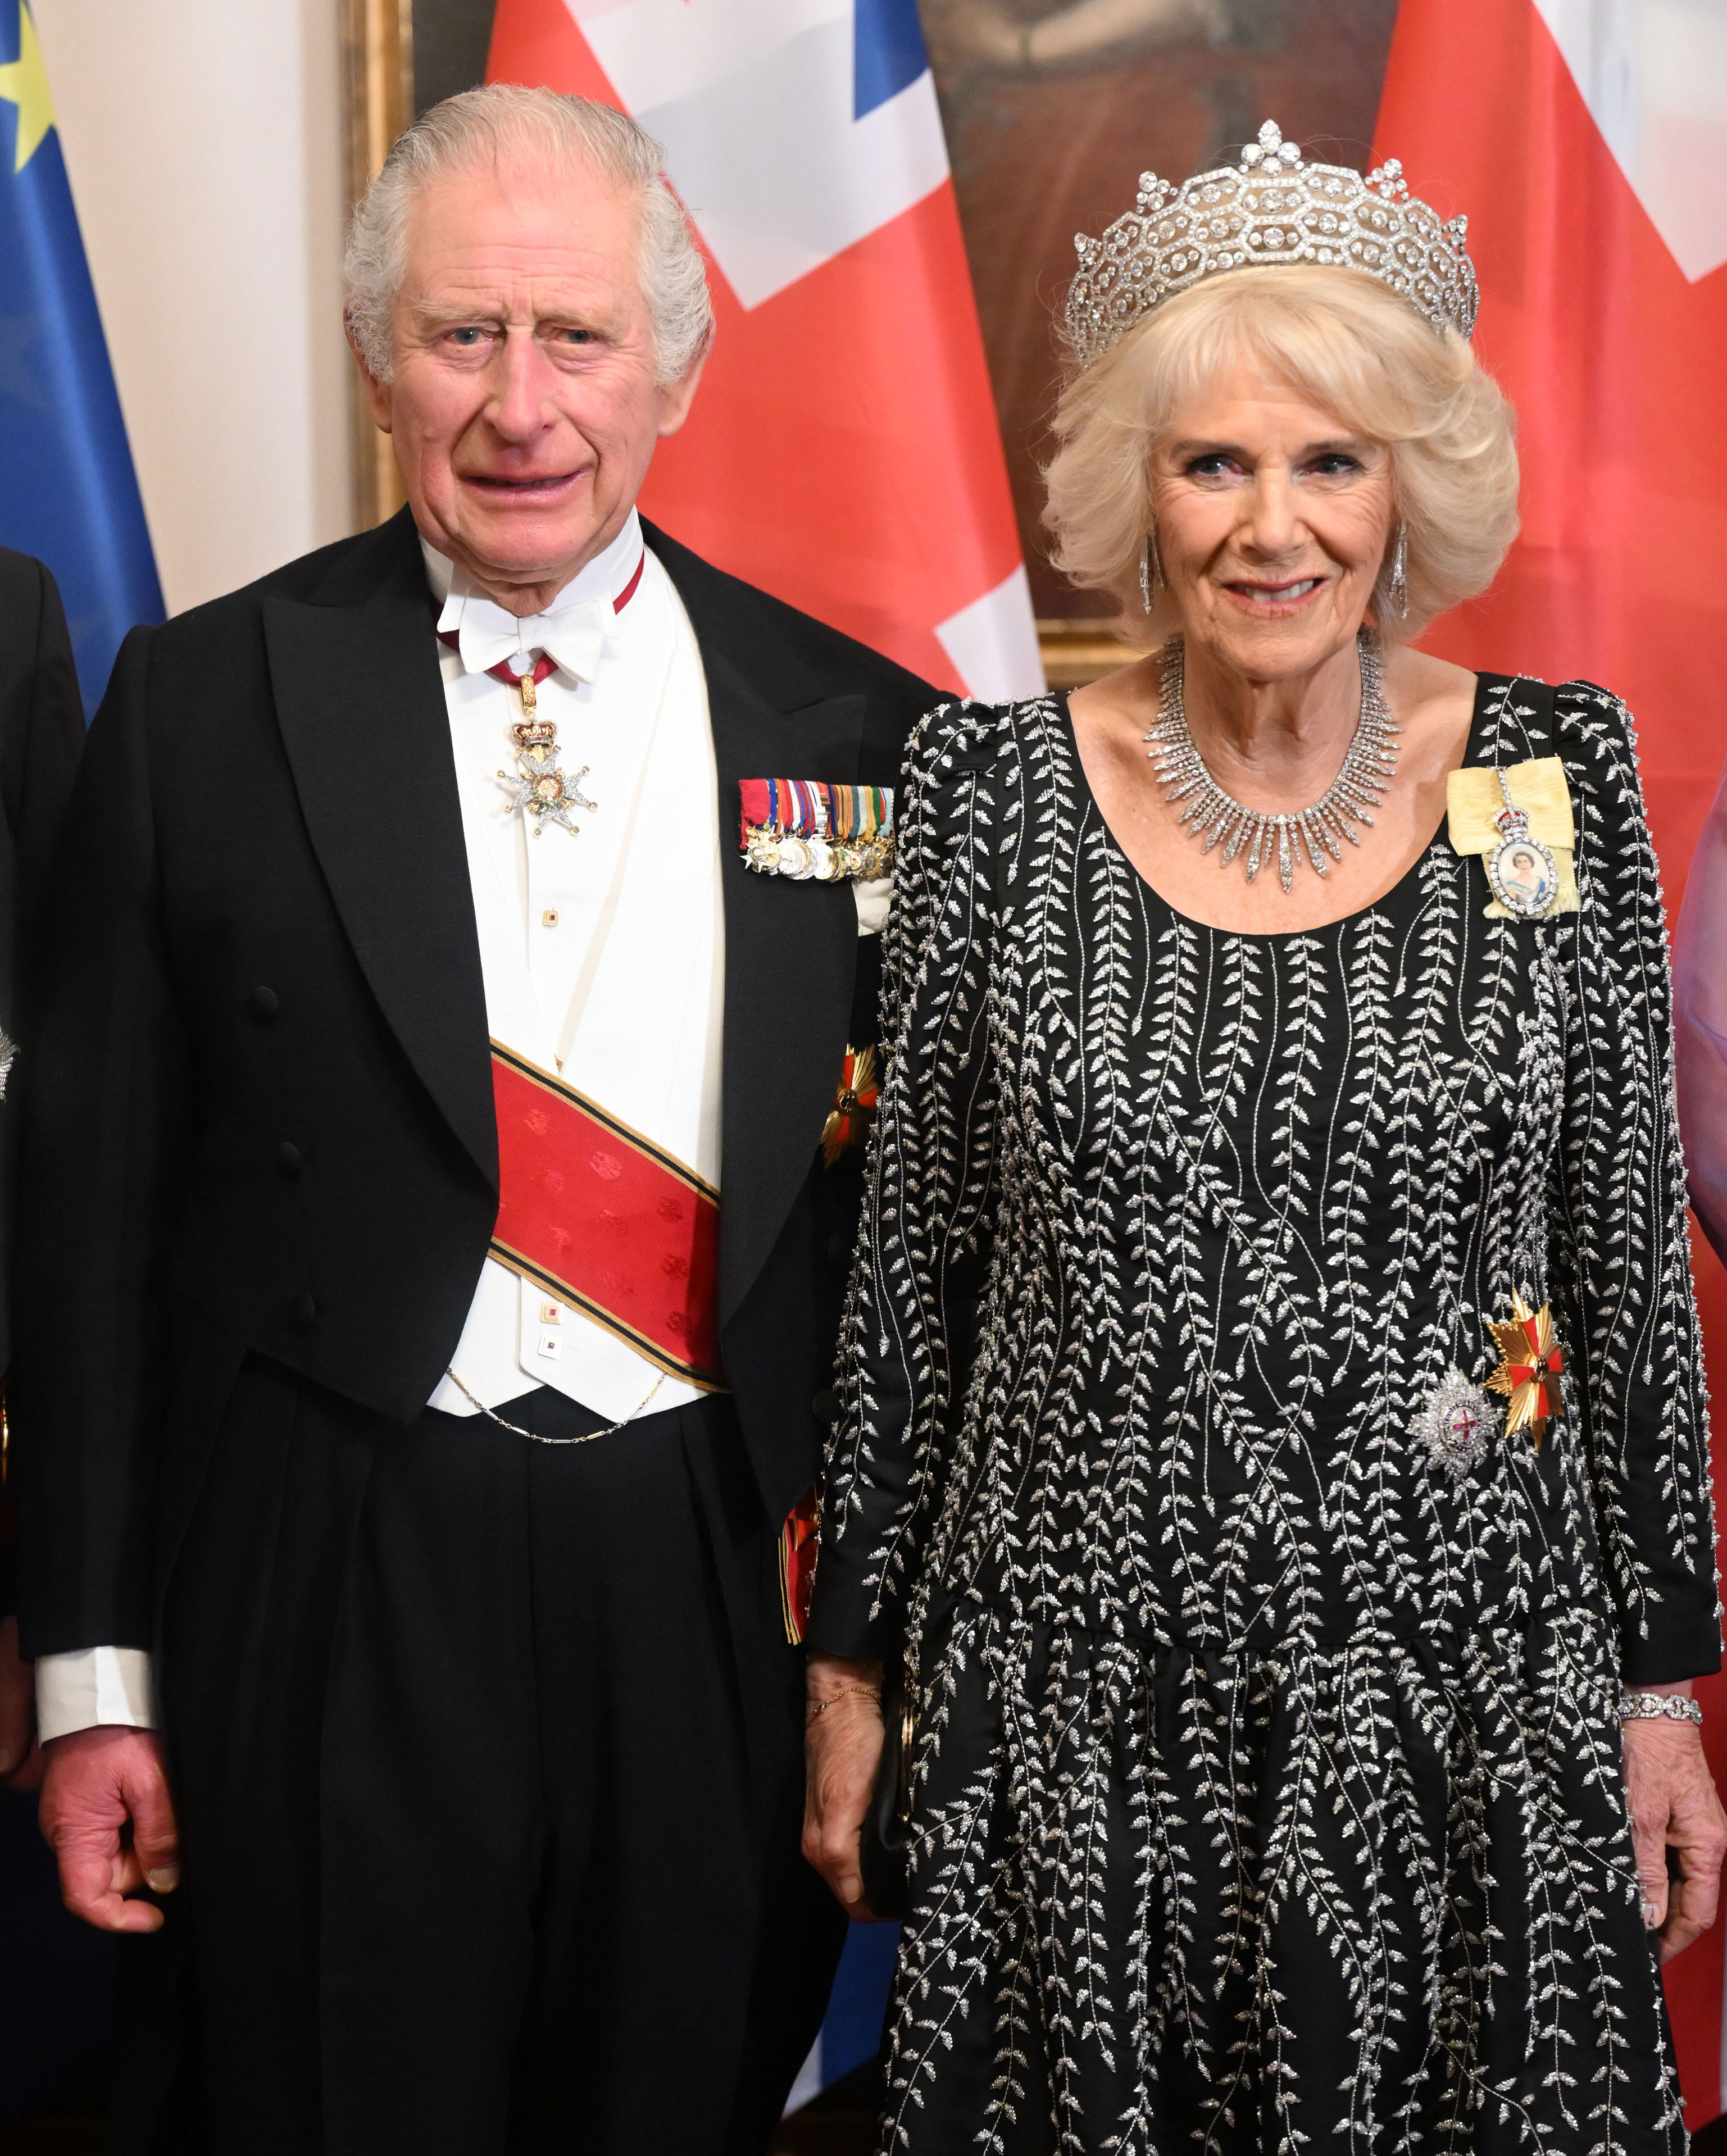 <p>King Charles III and Queen Consort Camilla arrived at a State Banquet hosted by Germany's president at Schloss Bellevue in Berlin on March 29, 2023 -- the first day of <a href="https://www.wonderwall.com/celebrity/king-charles-iii-and-queen-consort-camilla-the-best-photos-from-their-state-visit-to-germany-720122.gallery">the British royals' state visit to Germany</a>.</p><p> <br>MORE: <a href="https://www.wonderwall.com/celebrity/king-charles-iii-and-queen-consort-camilla-the-best-photos-from-their-state-visit-to-germany-720122.gallery">See the best photos from King Charles III and Queen Consort Camilla's state visit to Germany</a></p>